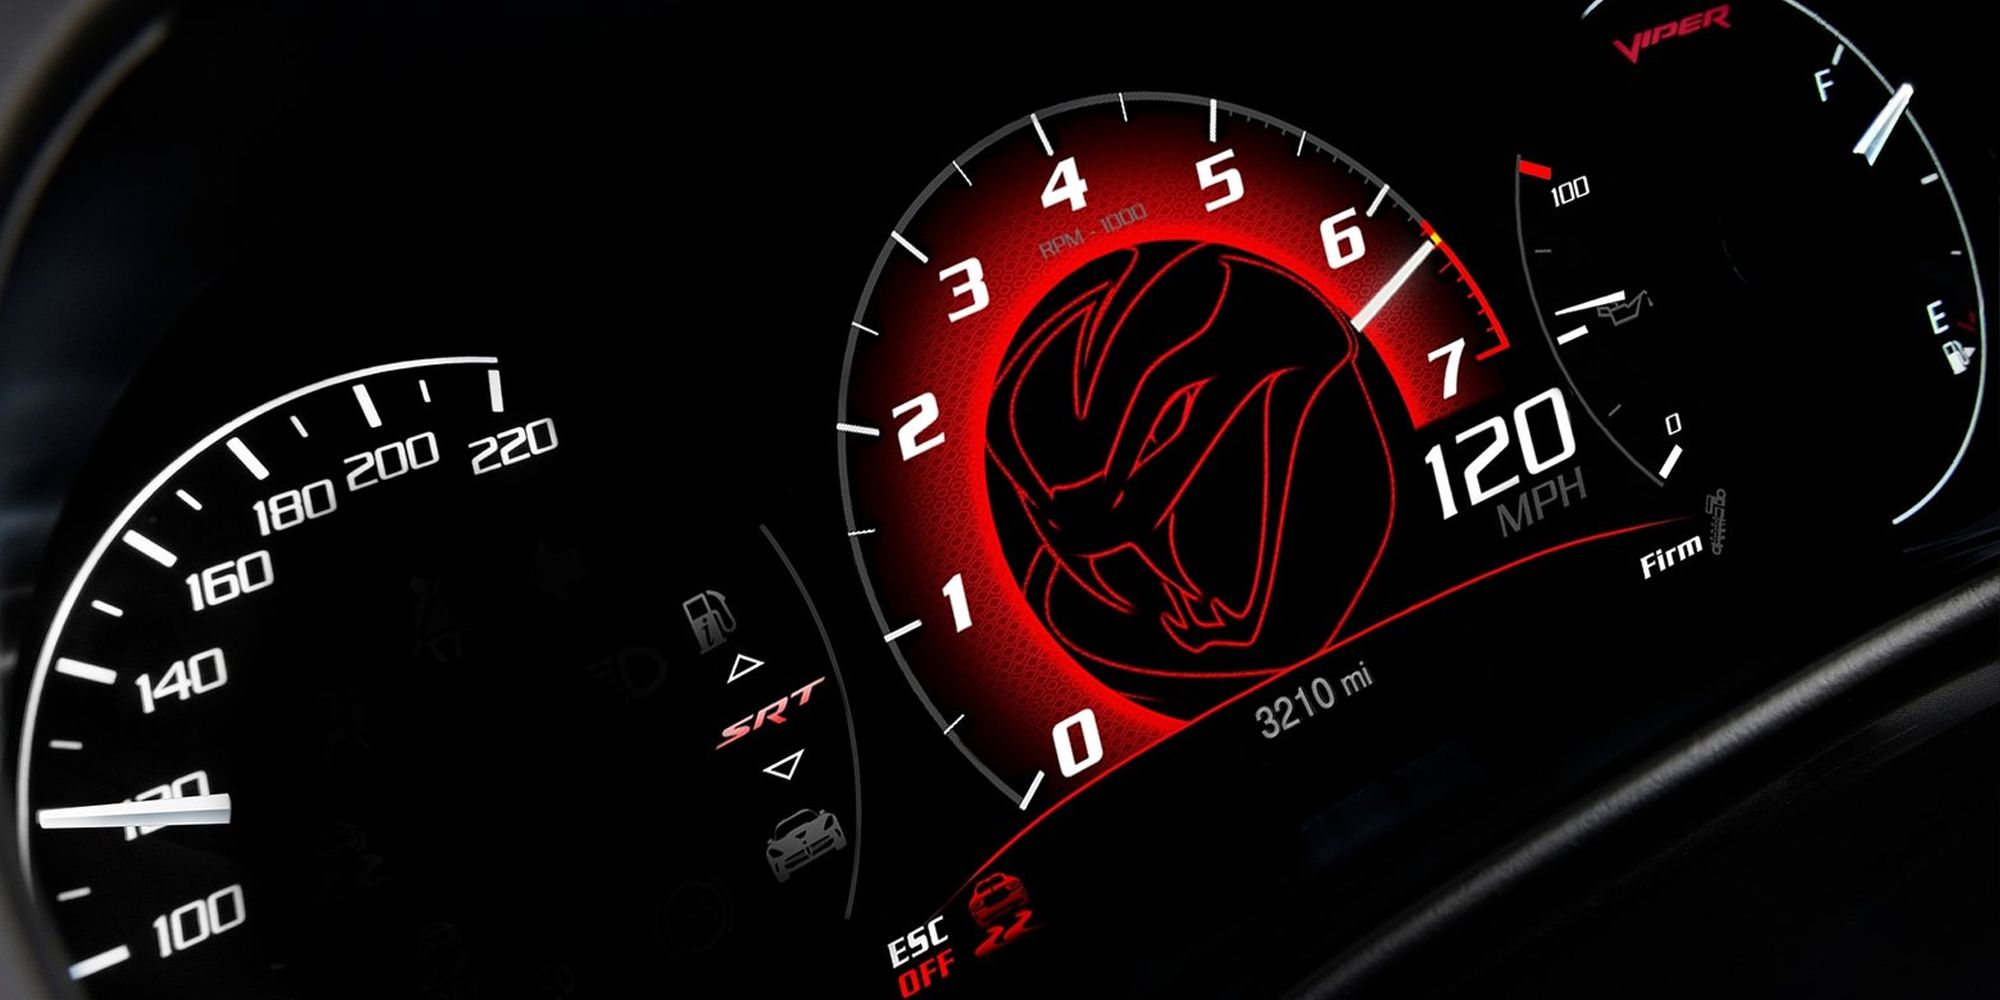 The gauge cluster in the Viper